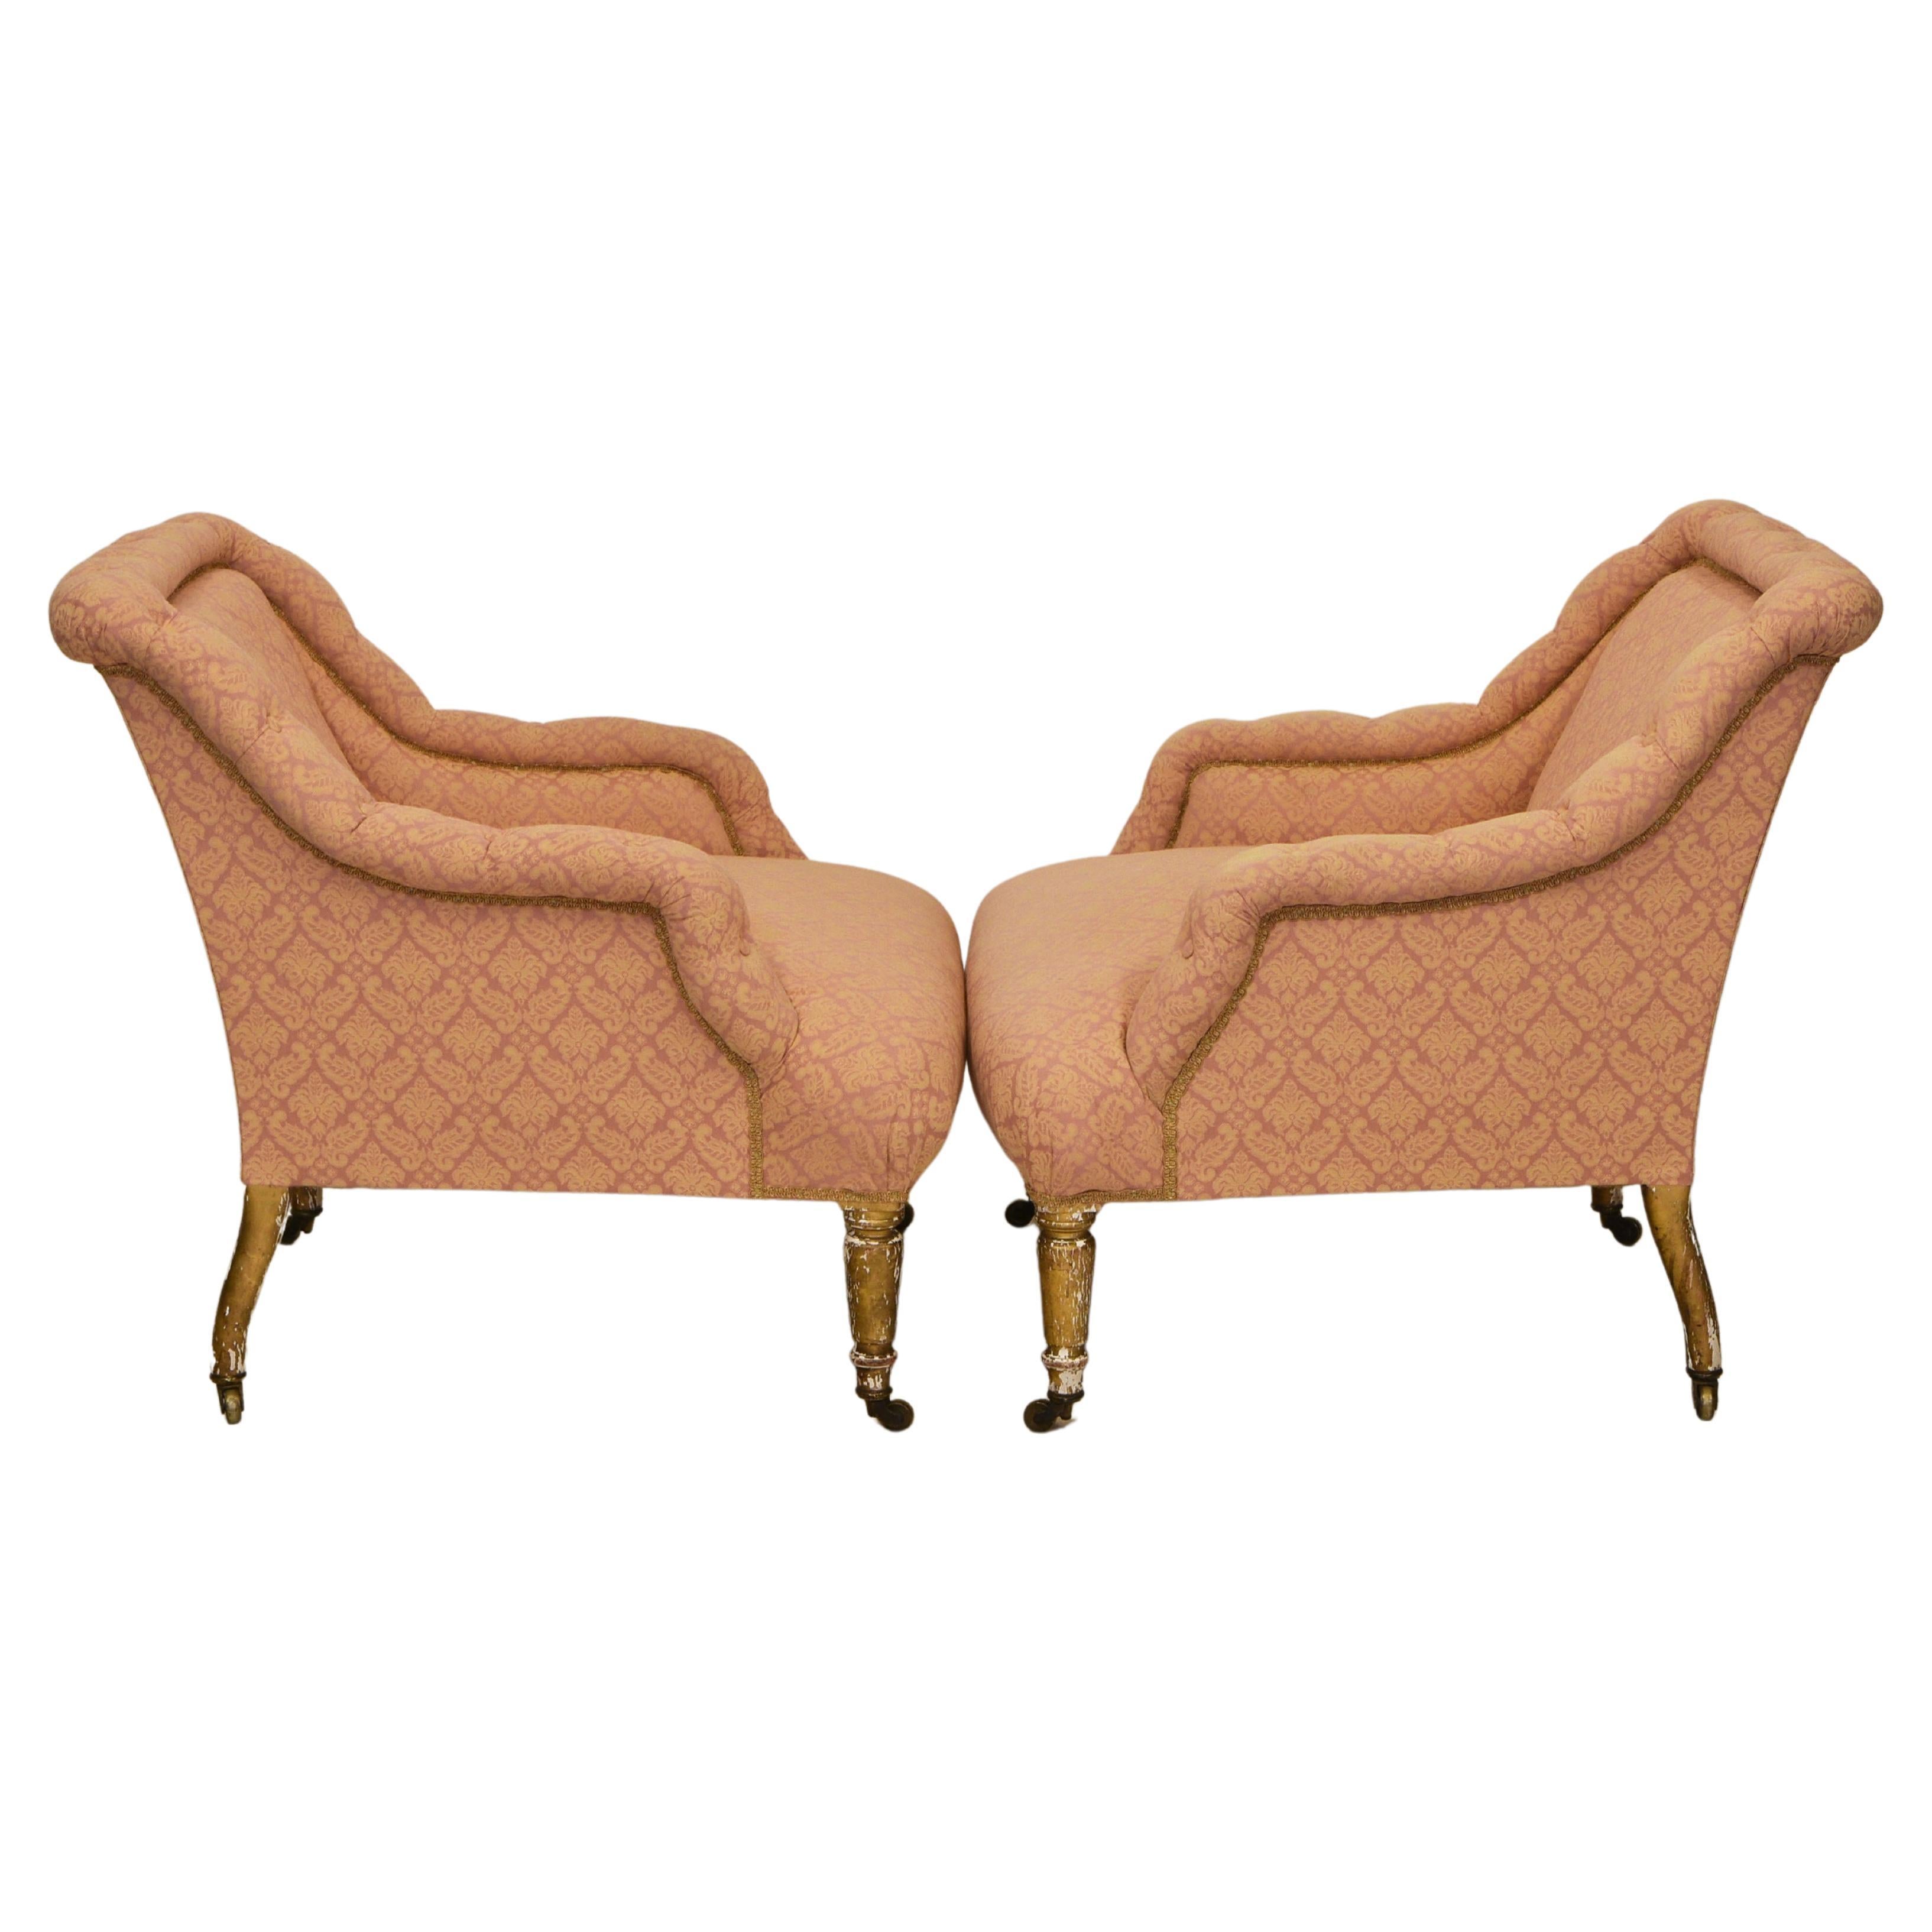 Pair of Antique Upholstered & Giltwood Armchairs by Mellier & Co London In Good Condition For Sale In Norwich, GB